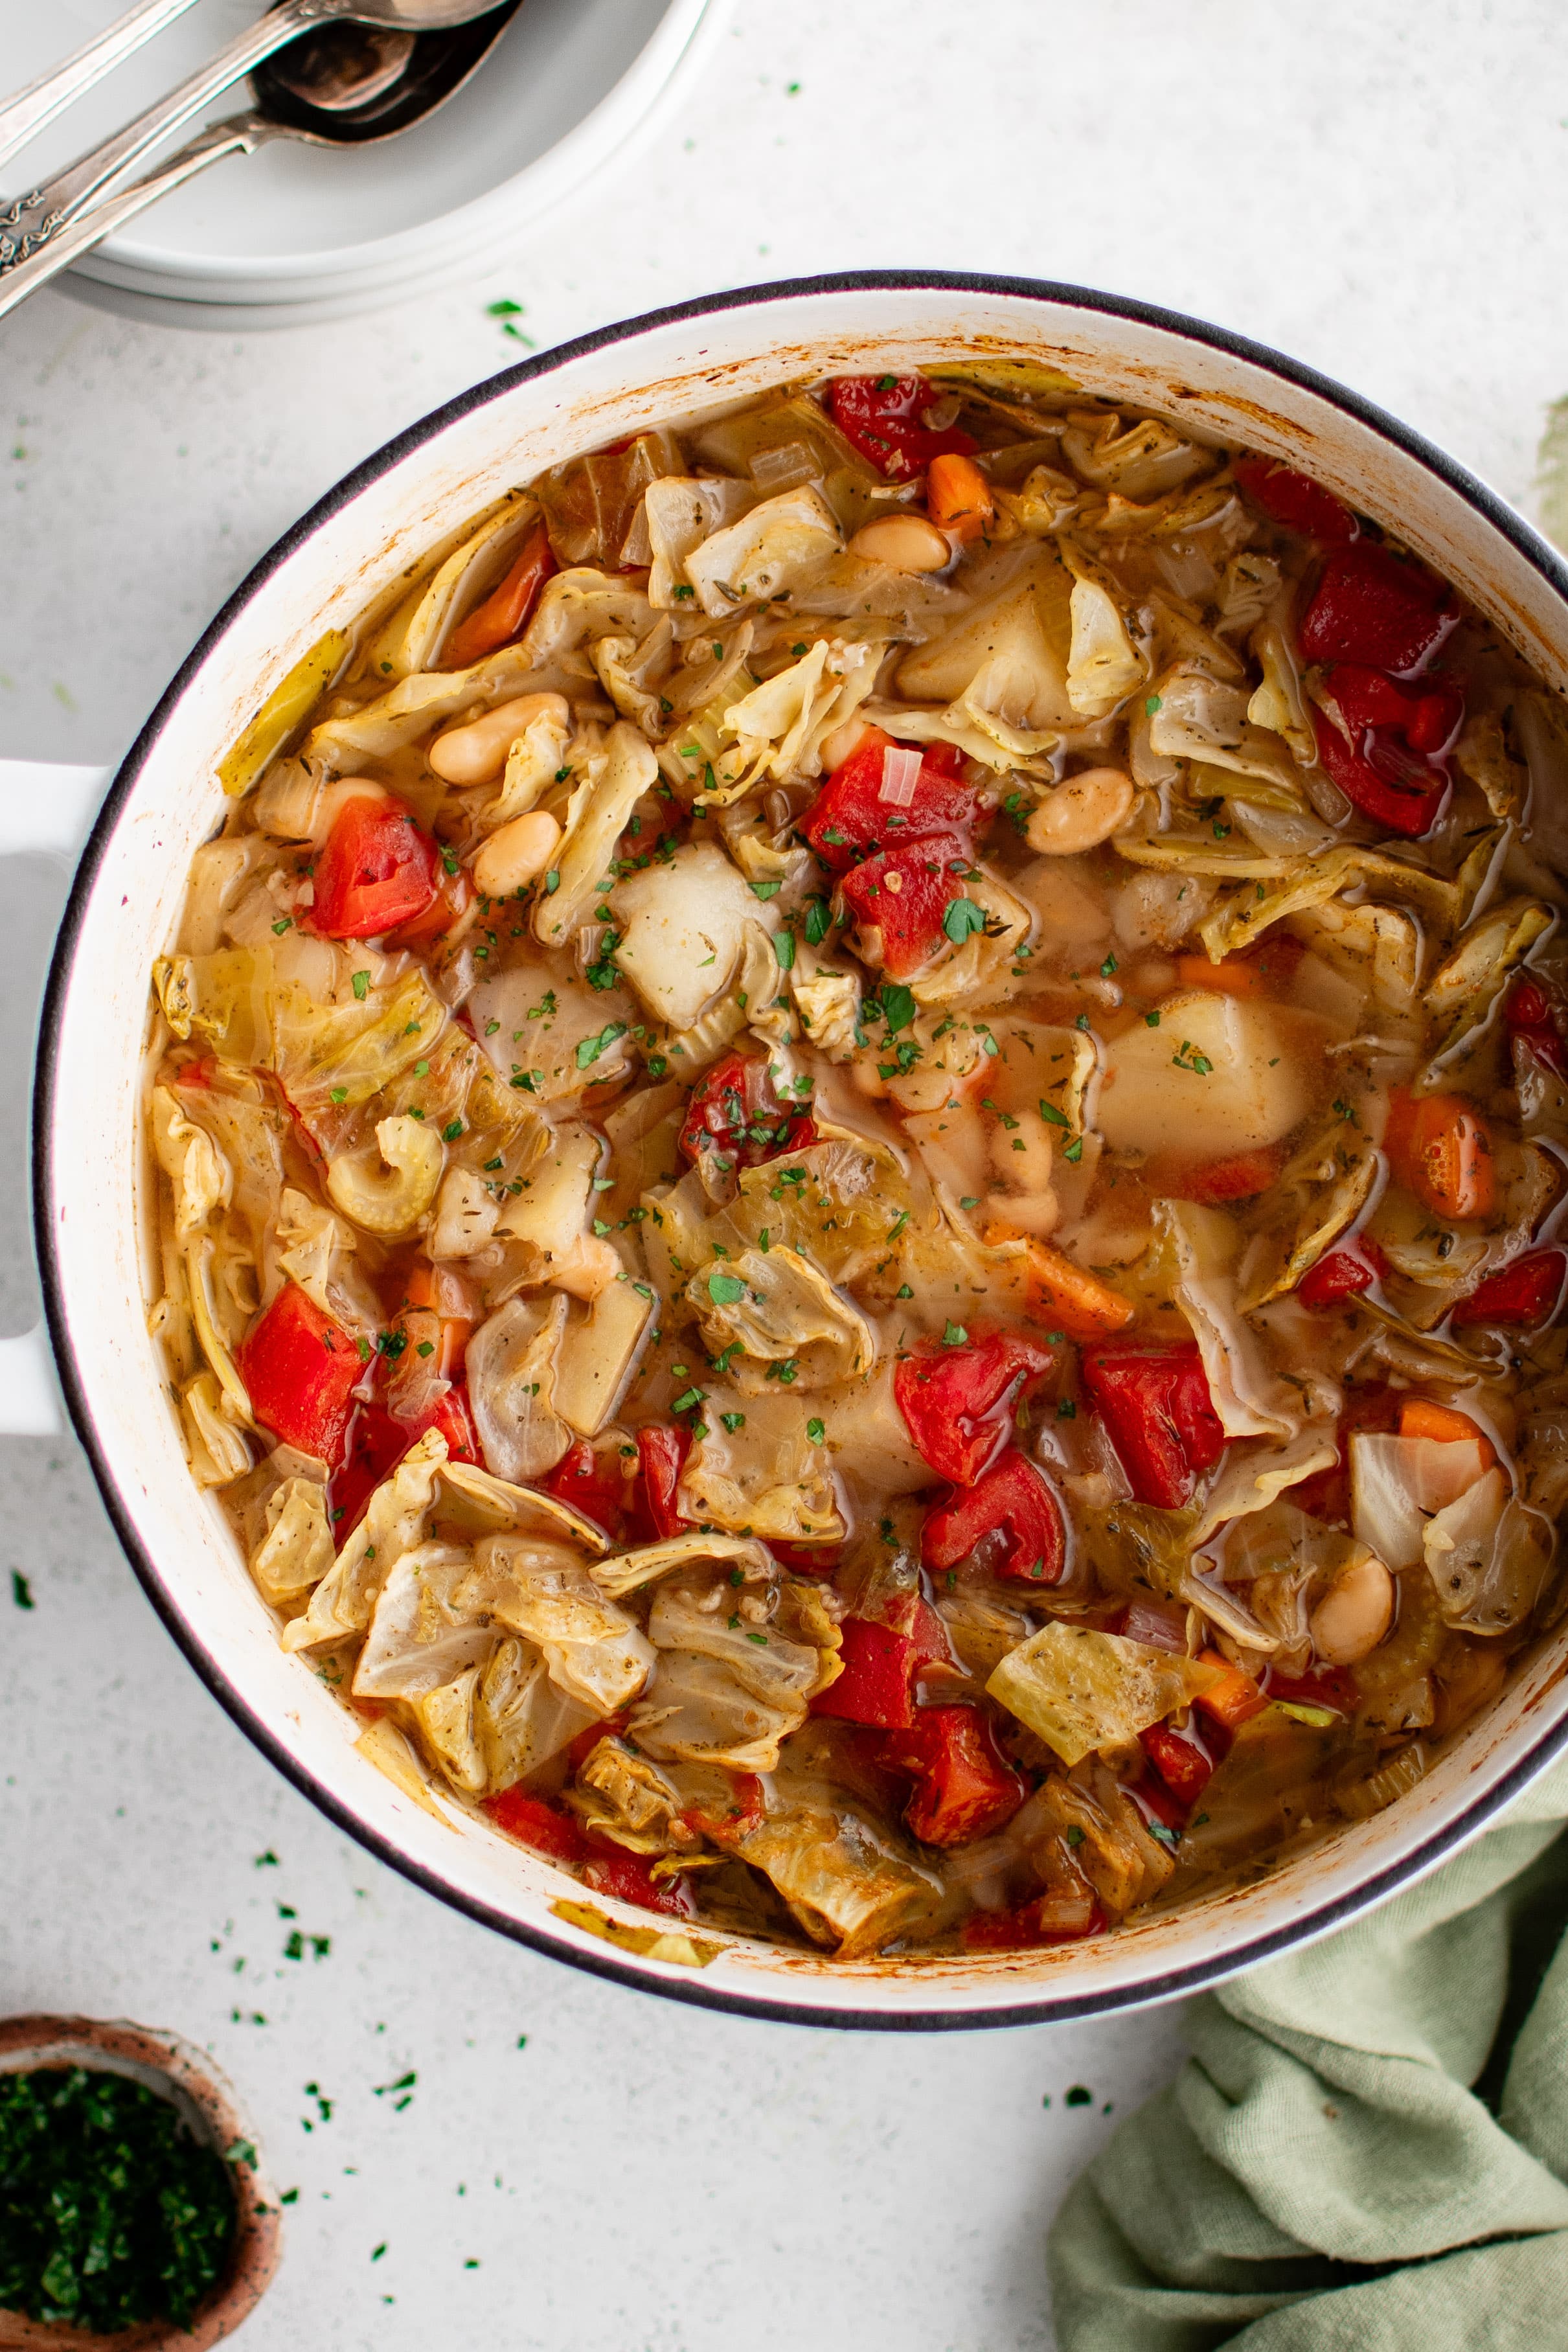 Filled with tender green cabbage, potatoes, mirepoix veggies, tomatoes, and white beans, it’s easy to make – all you need is one pot!